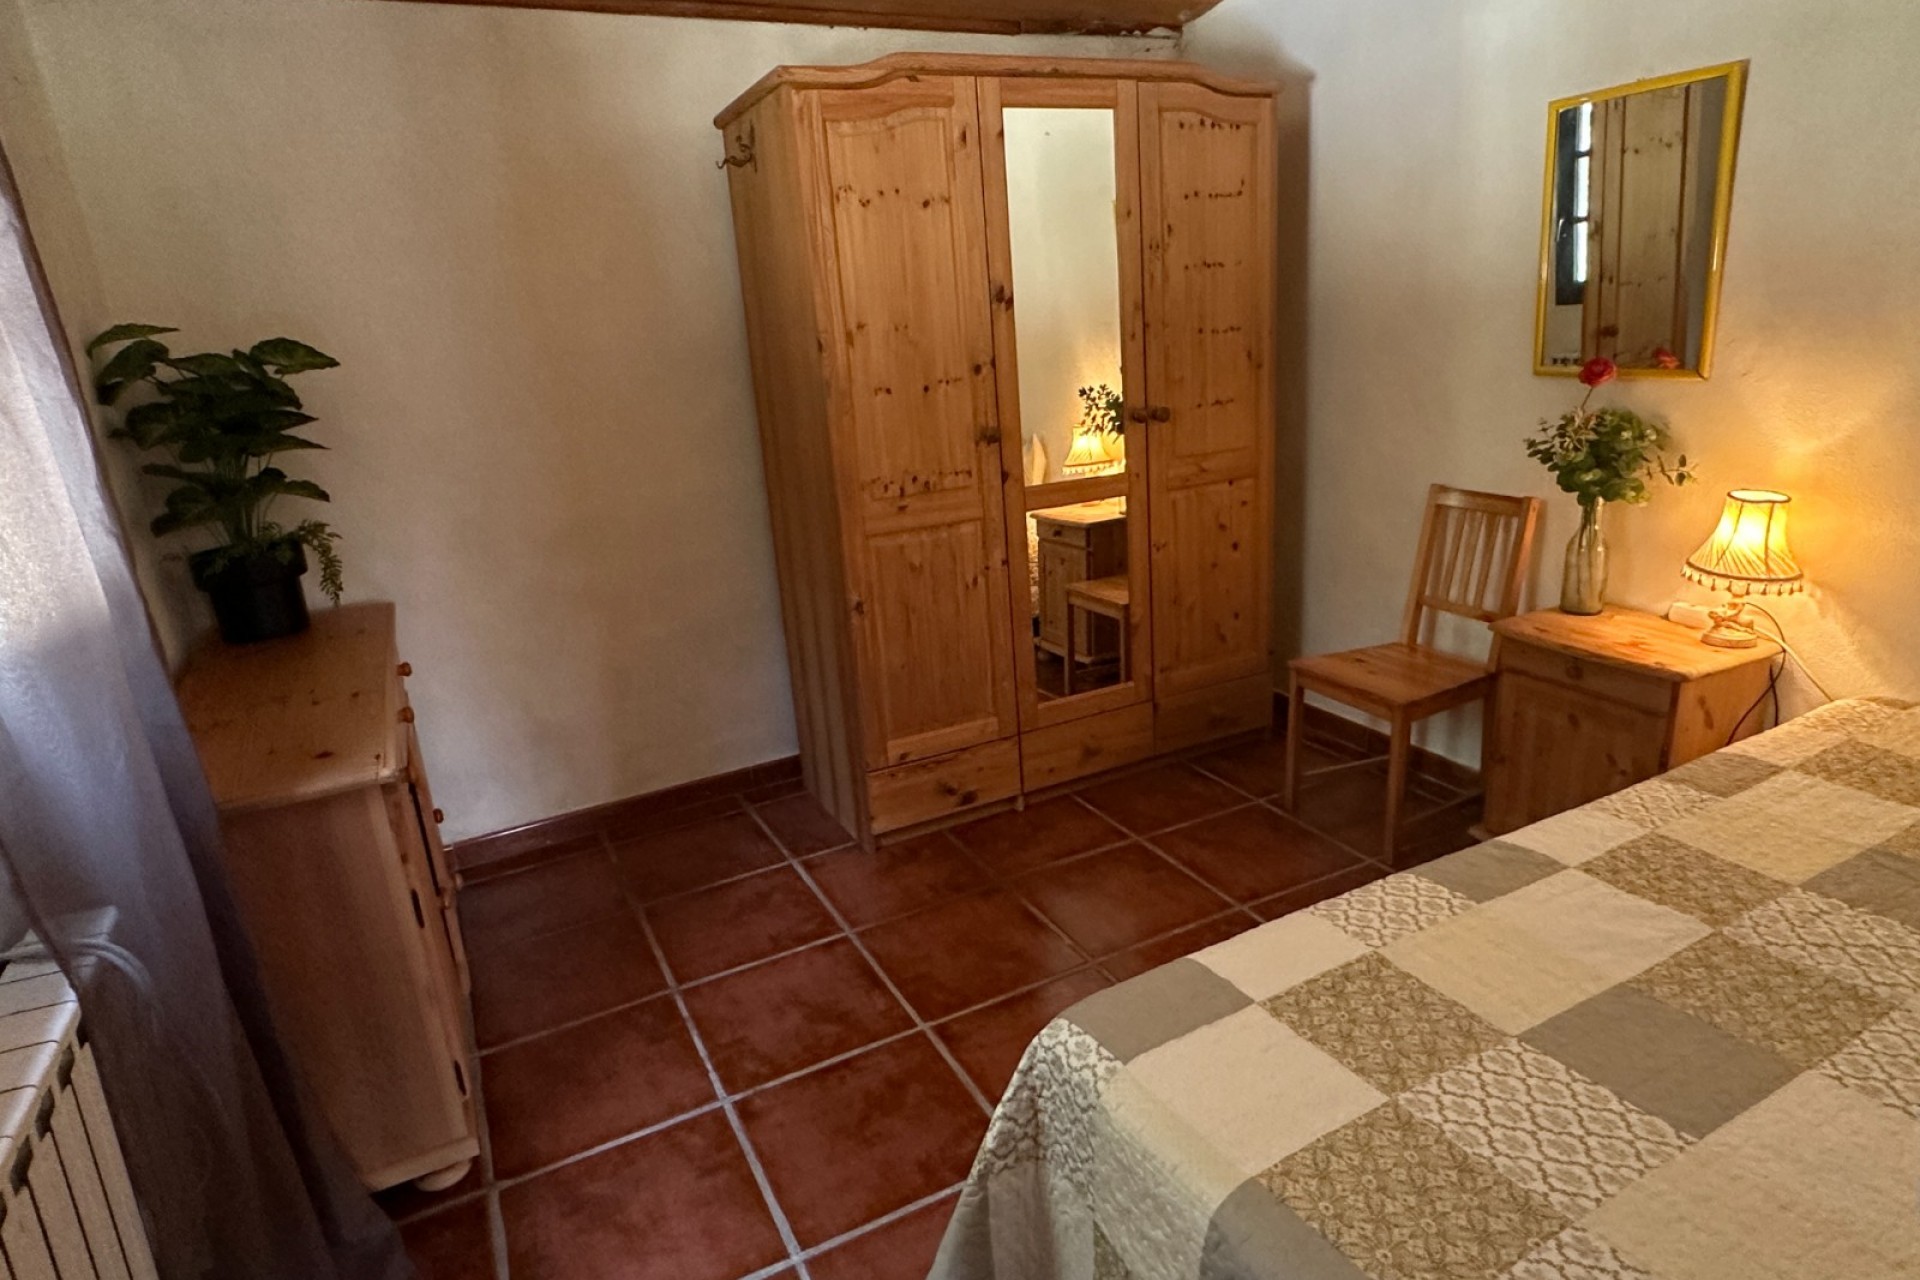 Revente - Country House -
Bocairent - Inland